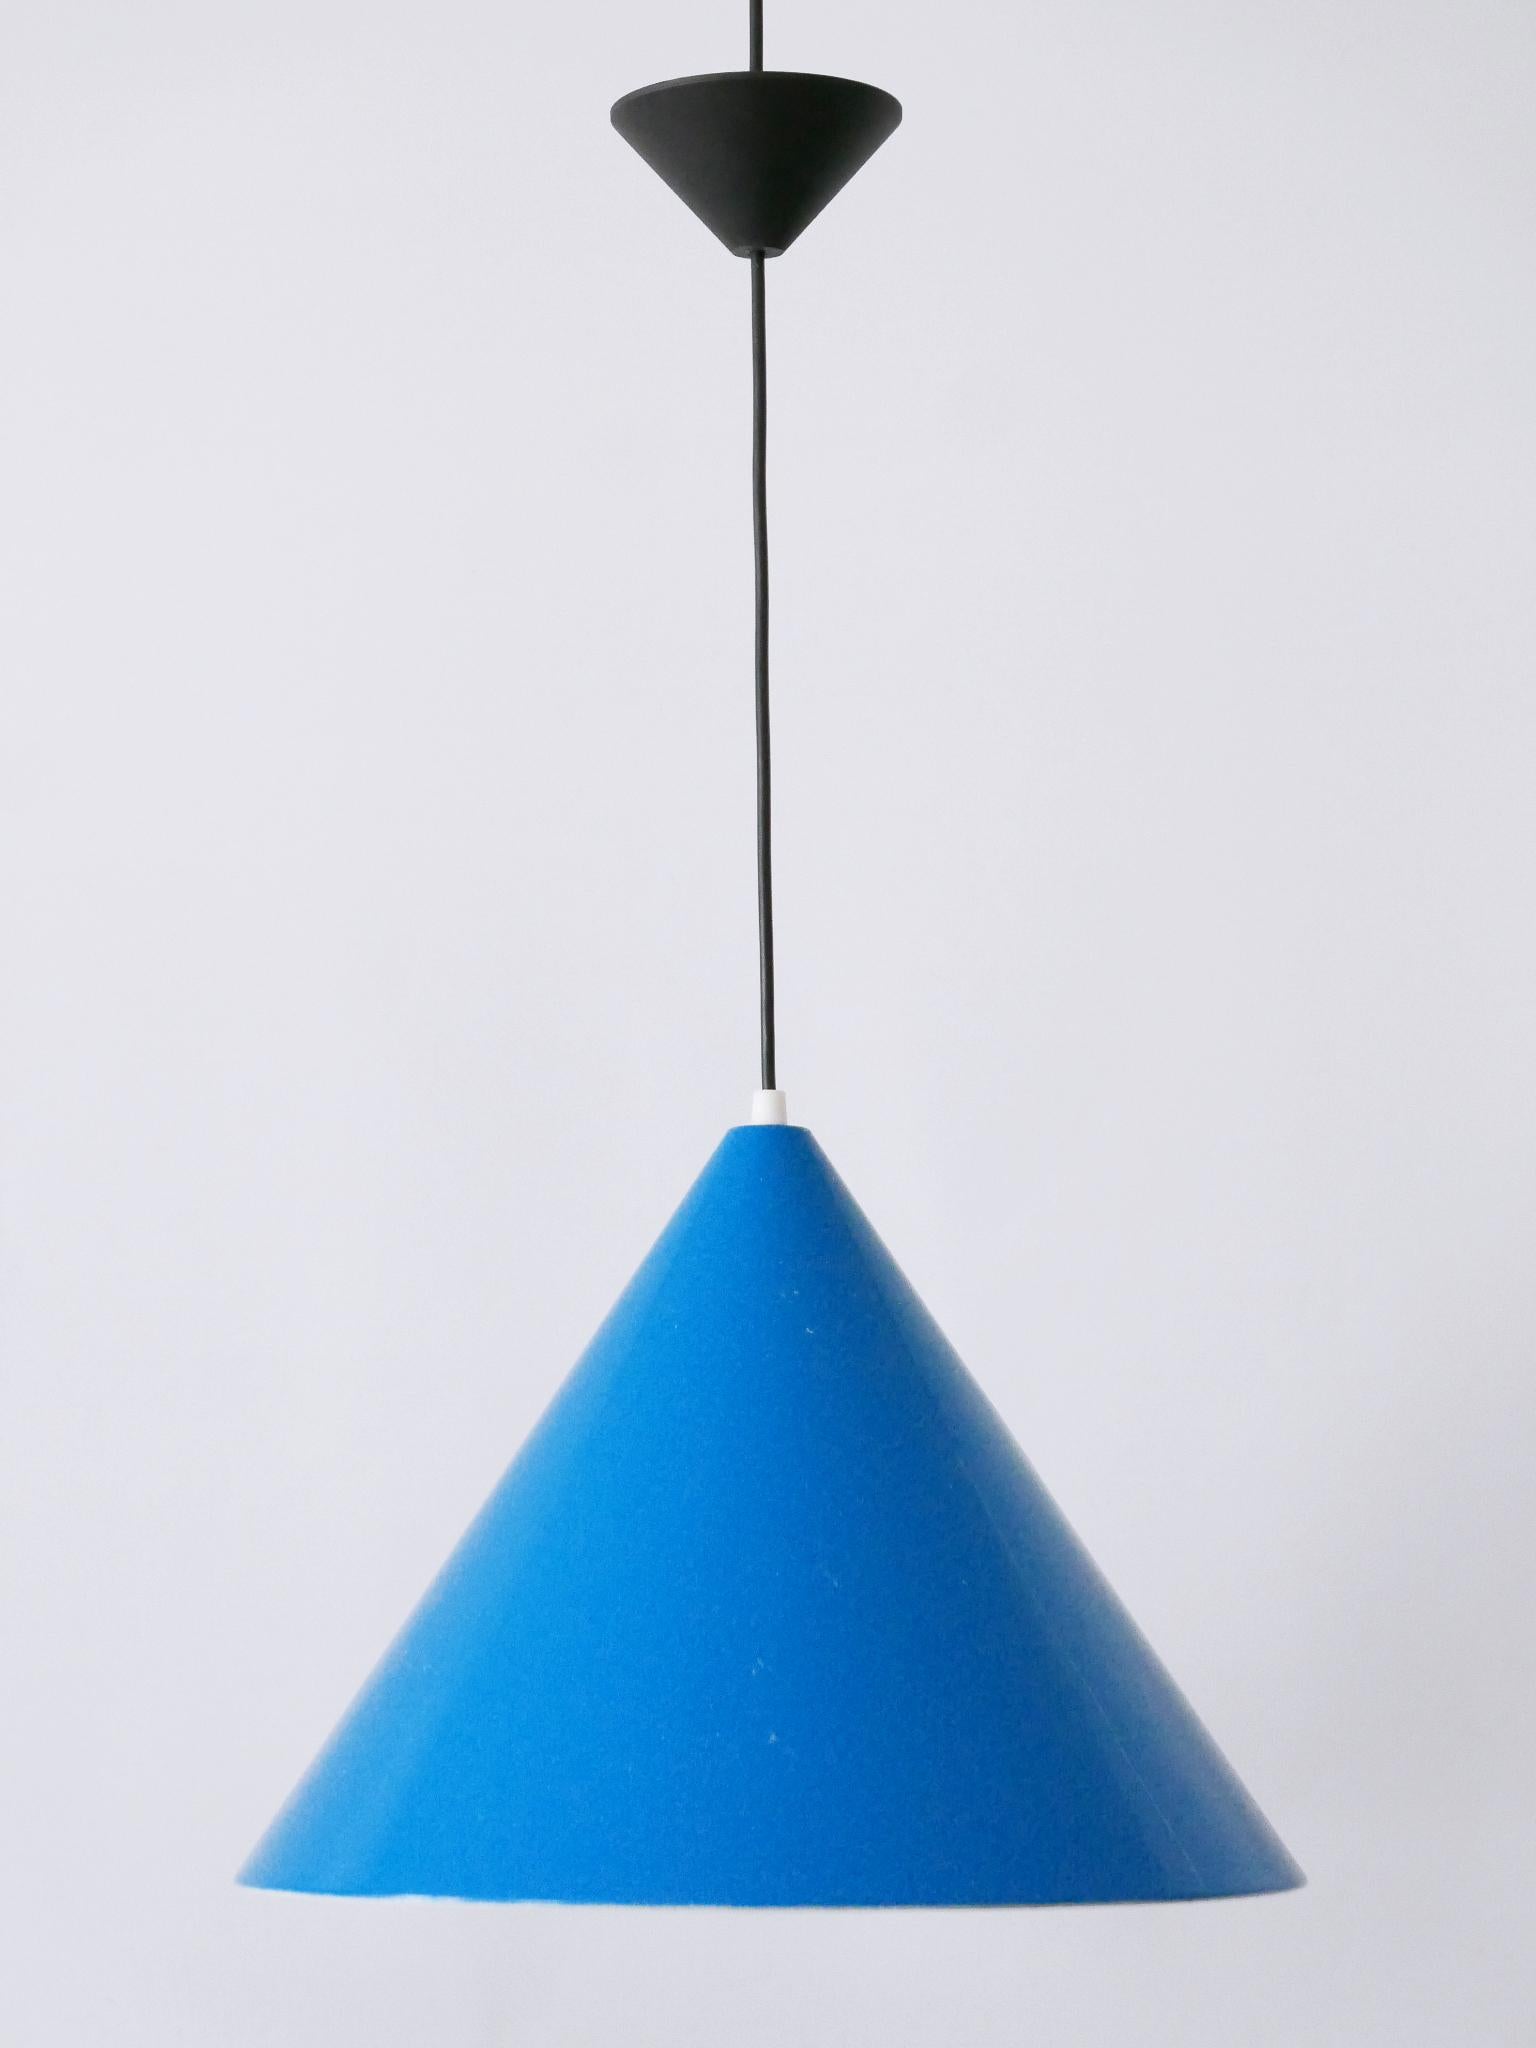 Elegant and highly decorative Mid-Century Modern pendant lamps or hanging lights. Designed by Louis Poulsen, Denmark, 1960s.

Price per item. Six identical pendant lamps available

Executed in blue painted aluminium, each pendant lamp is executed